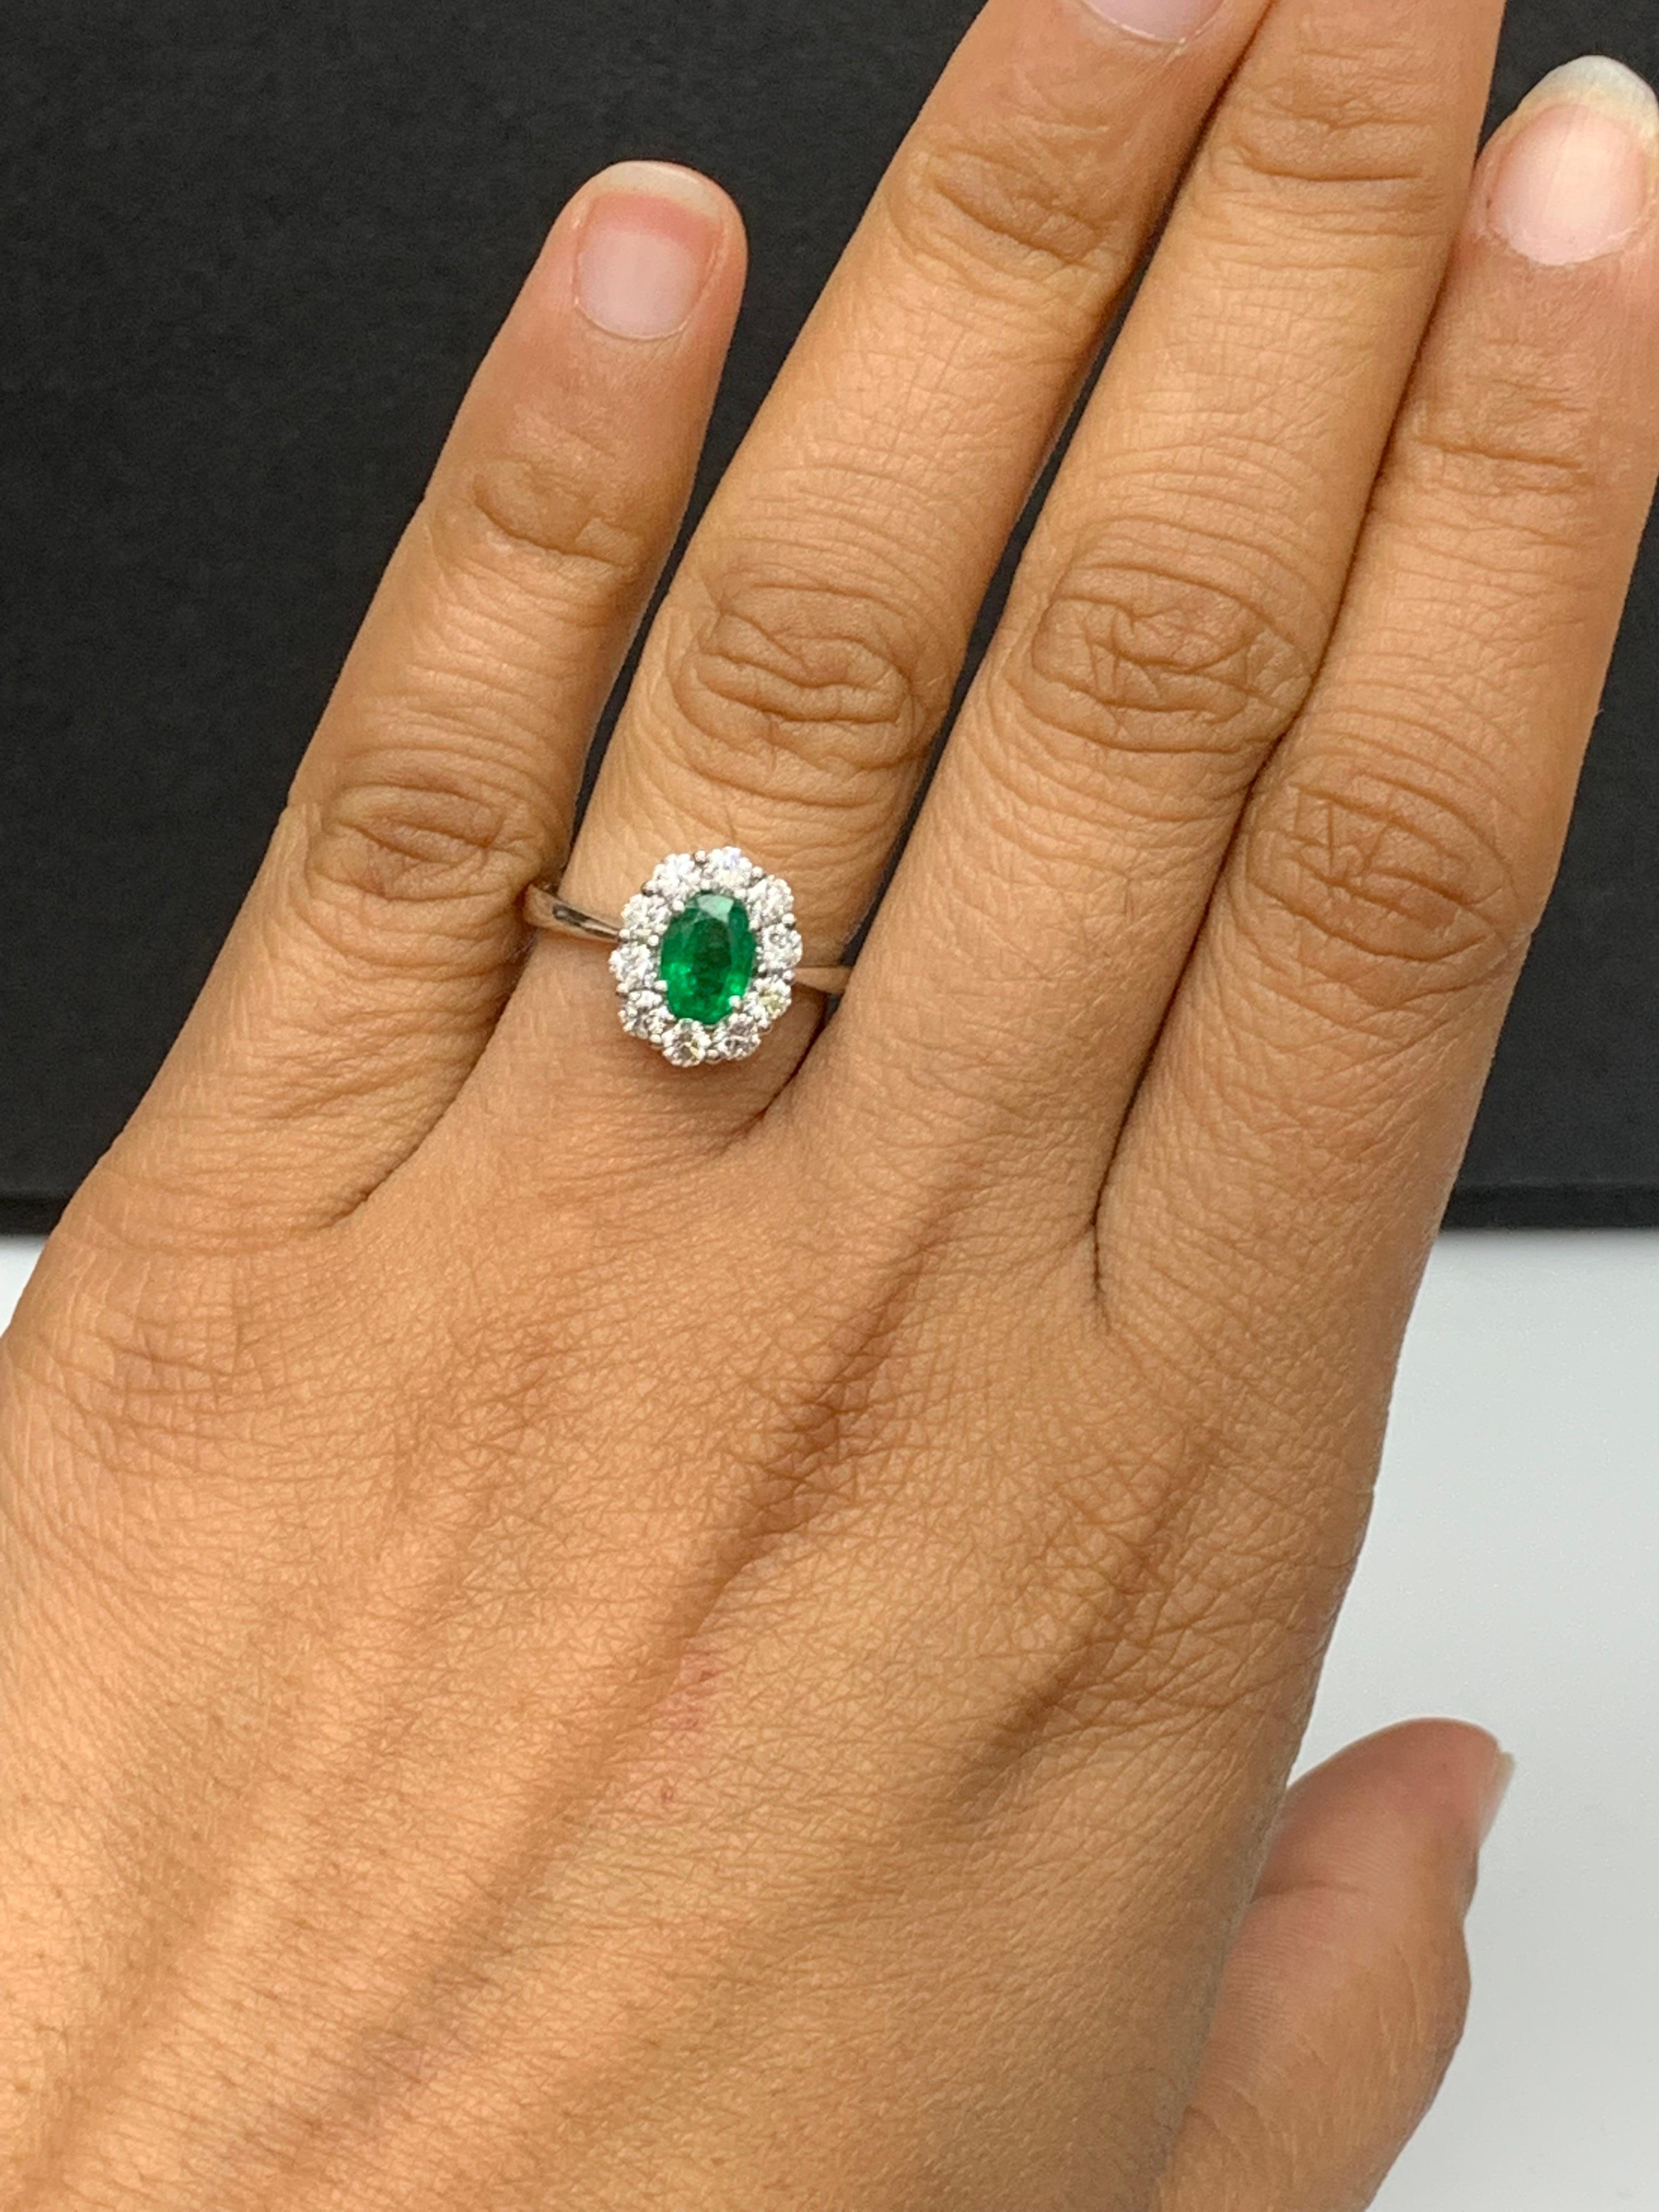 0.68 Carat Oval Cut Emerald and Diamond Ring in 18k White Gold For Sale 1